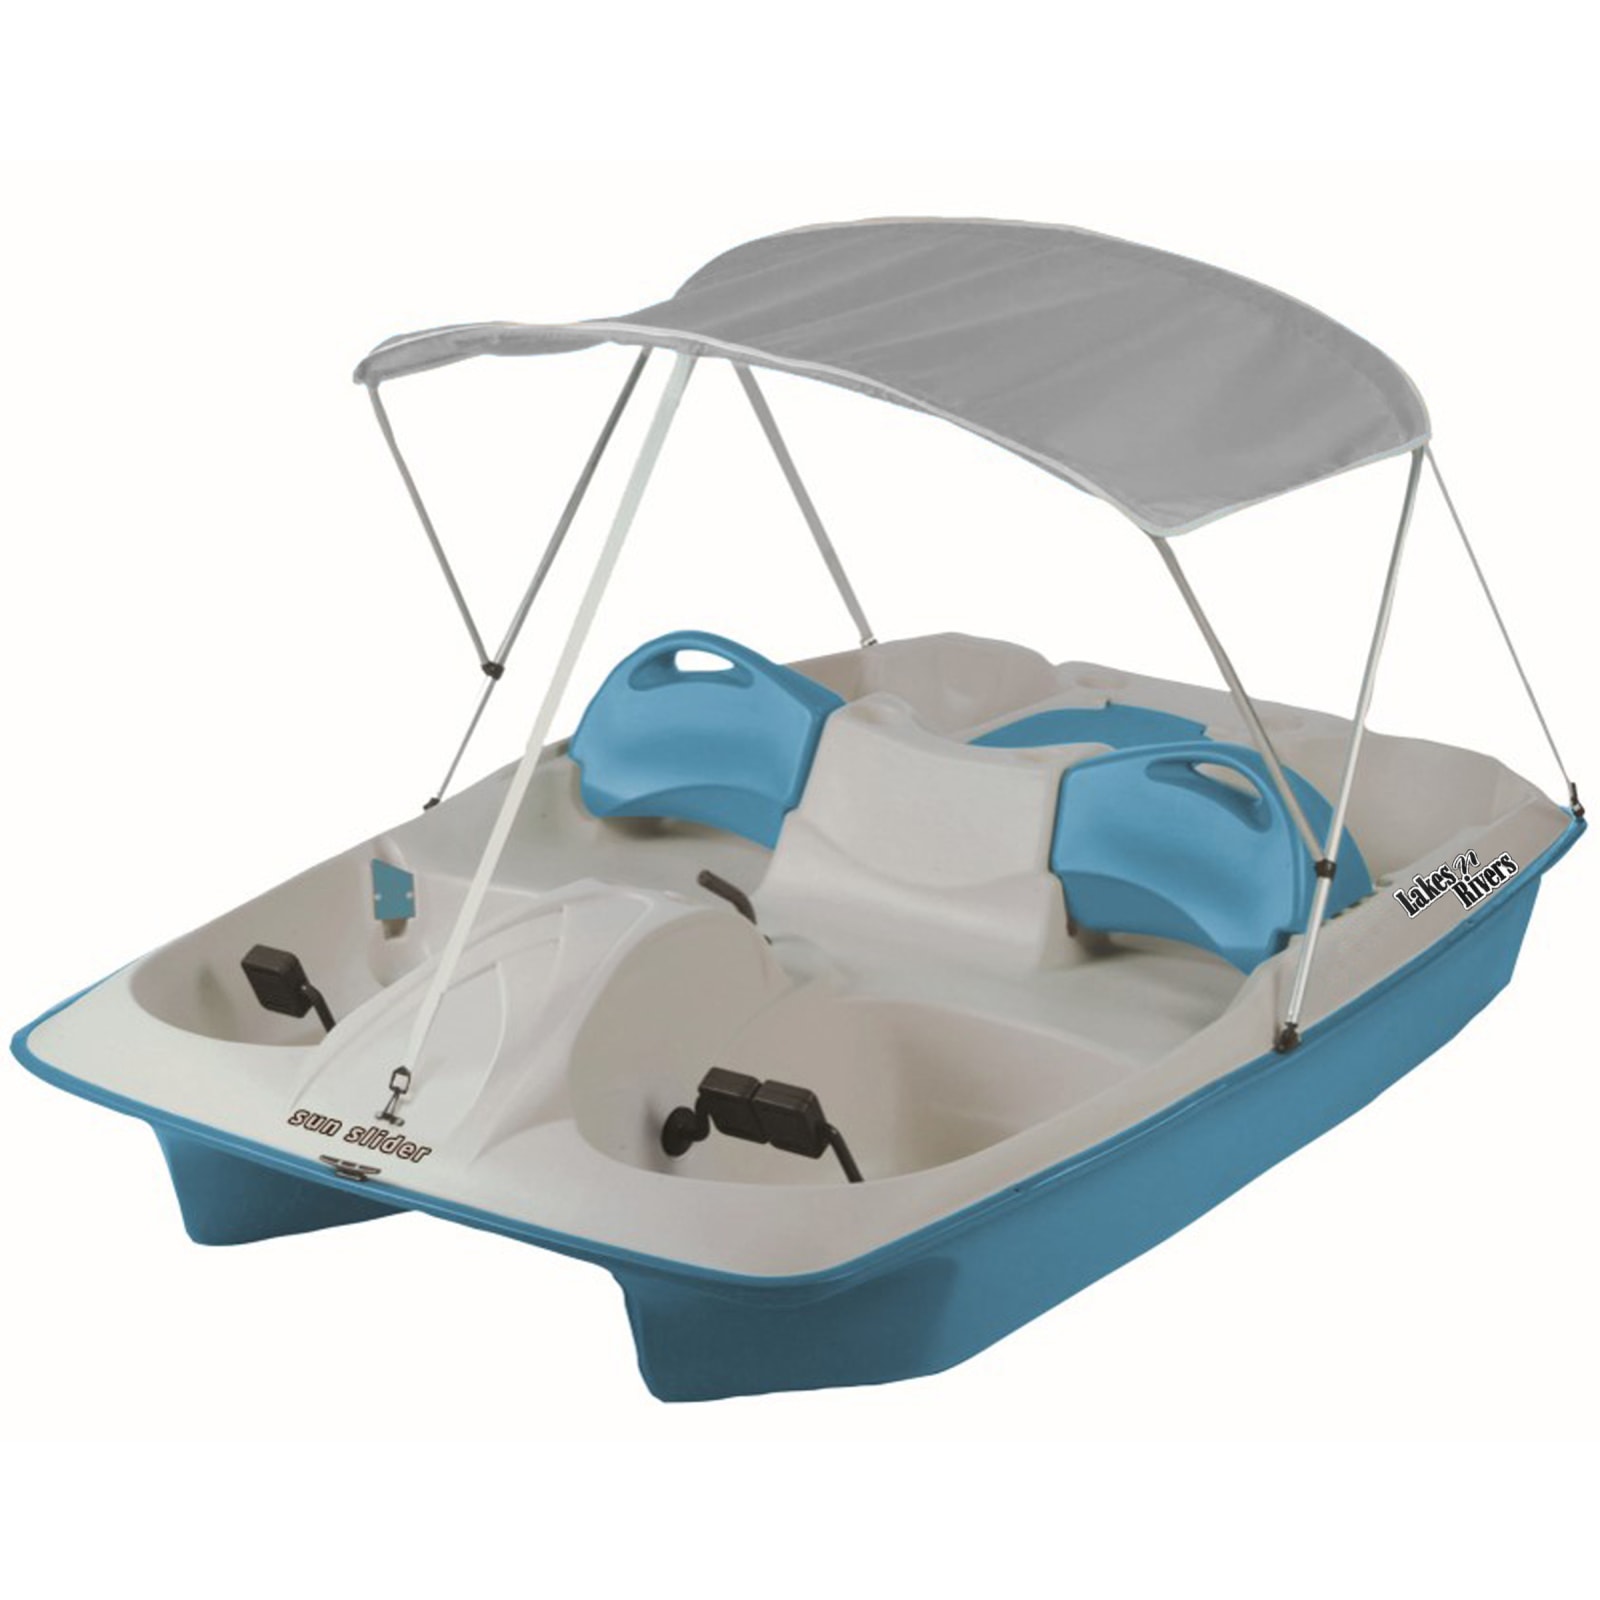 Slider 3 Person Ocean Blue Pedal Boat w/ Gray Canopy by Lakes & Rivers at  Fleet Farm